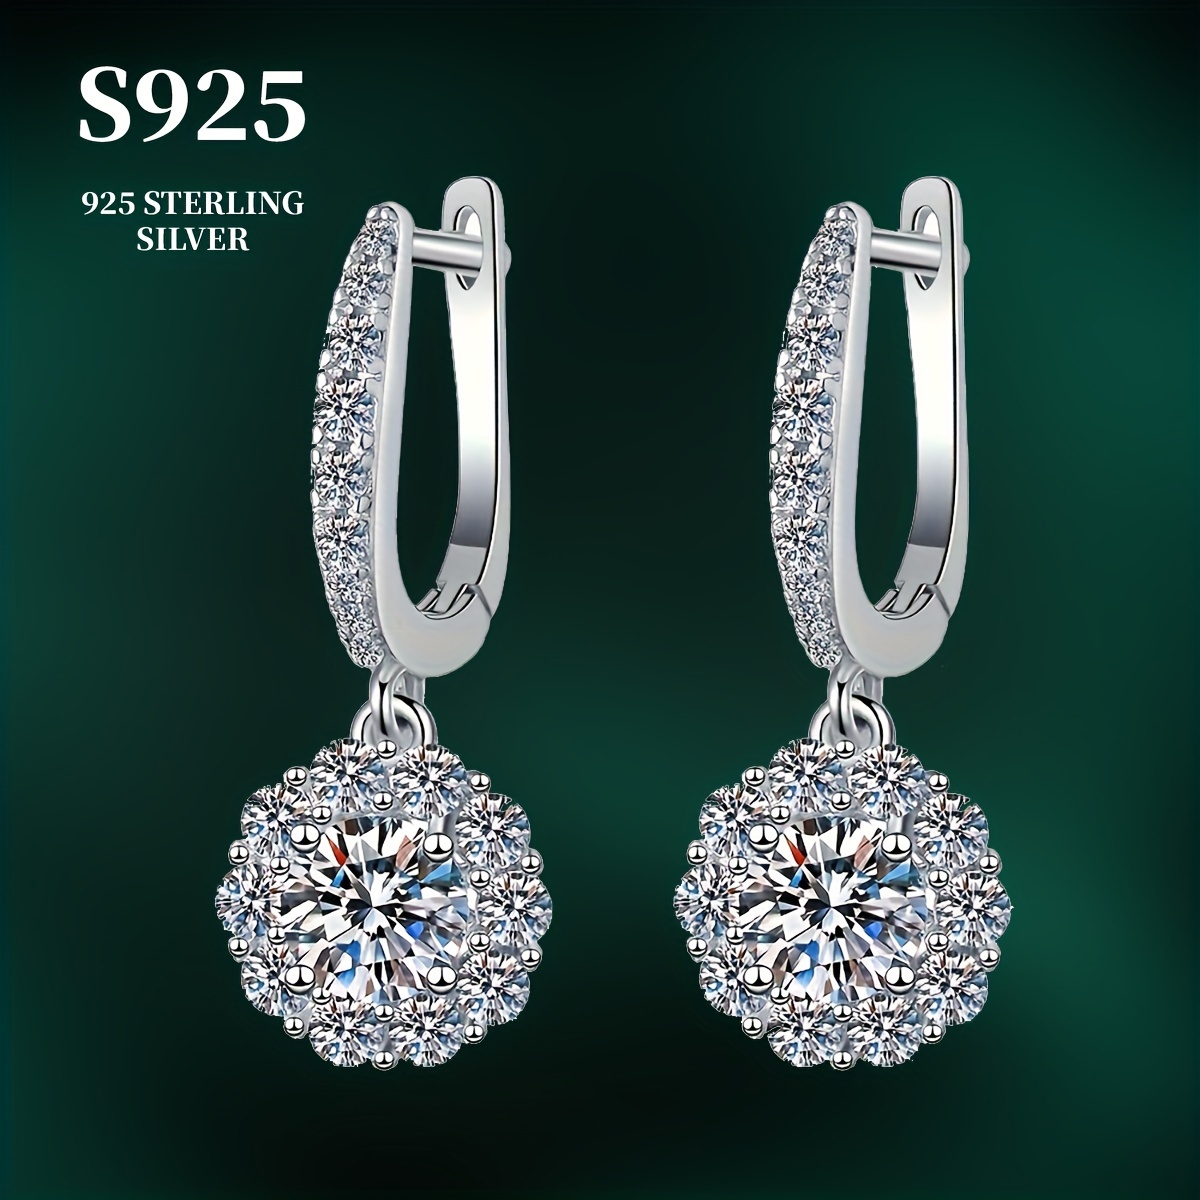 

1 Piece Of Finely Crafted Plated 925 Sterling Silver, Main Stone: 1 Carat 2*pcs Moissanite Fully Inlaid With Hollow Threads, Fashionable Pendant Earrings For Men And Women